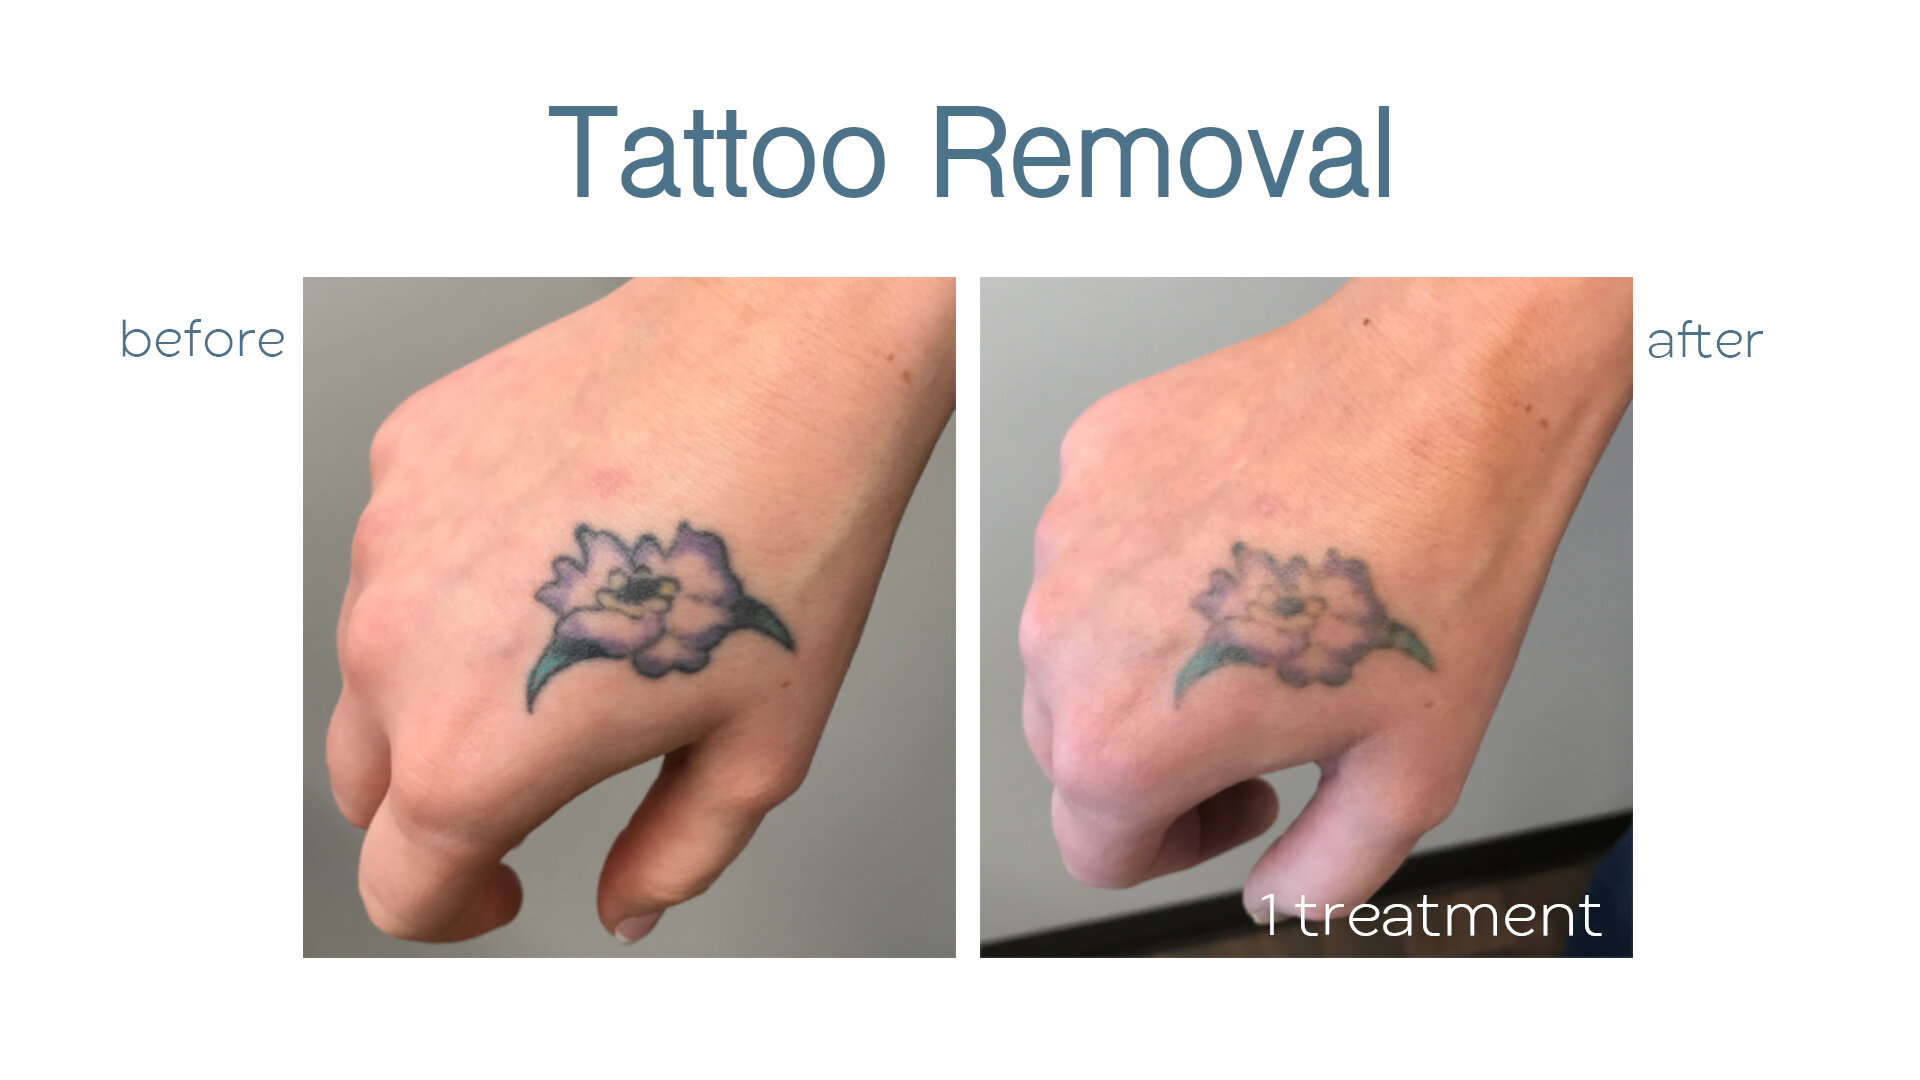 Share 95+ about tattoo removal near me super cool .vn